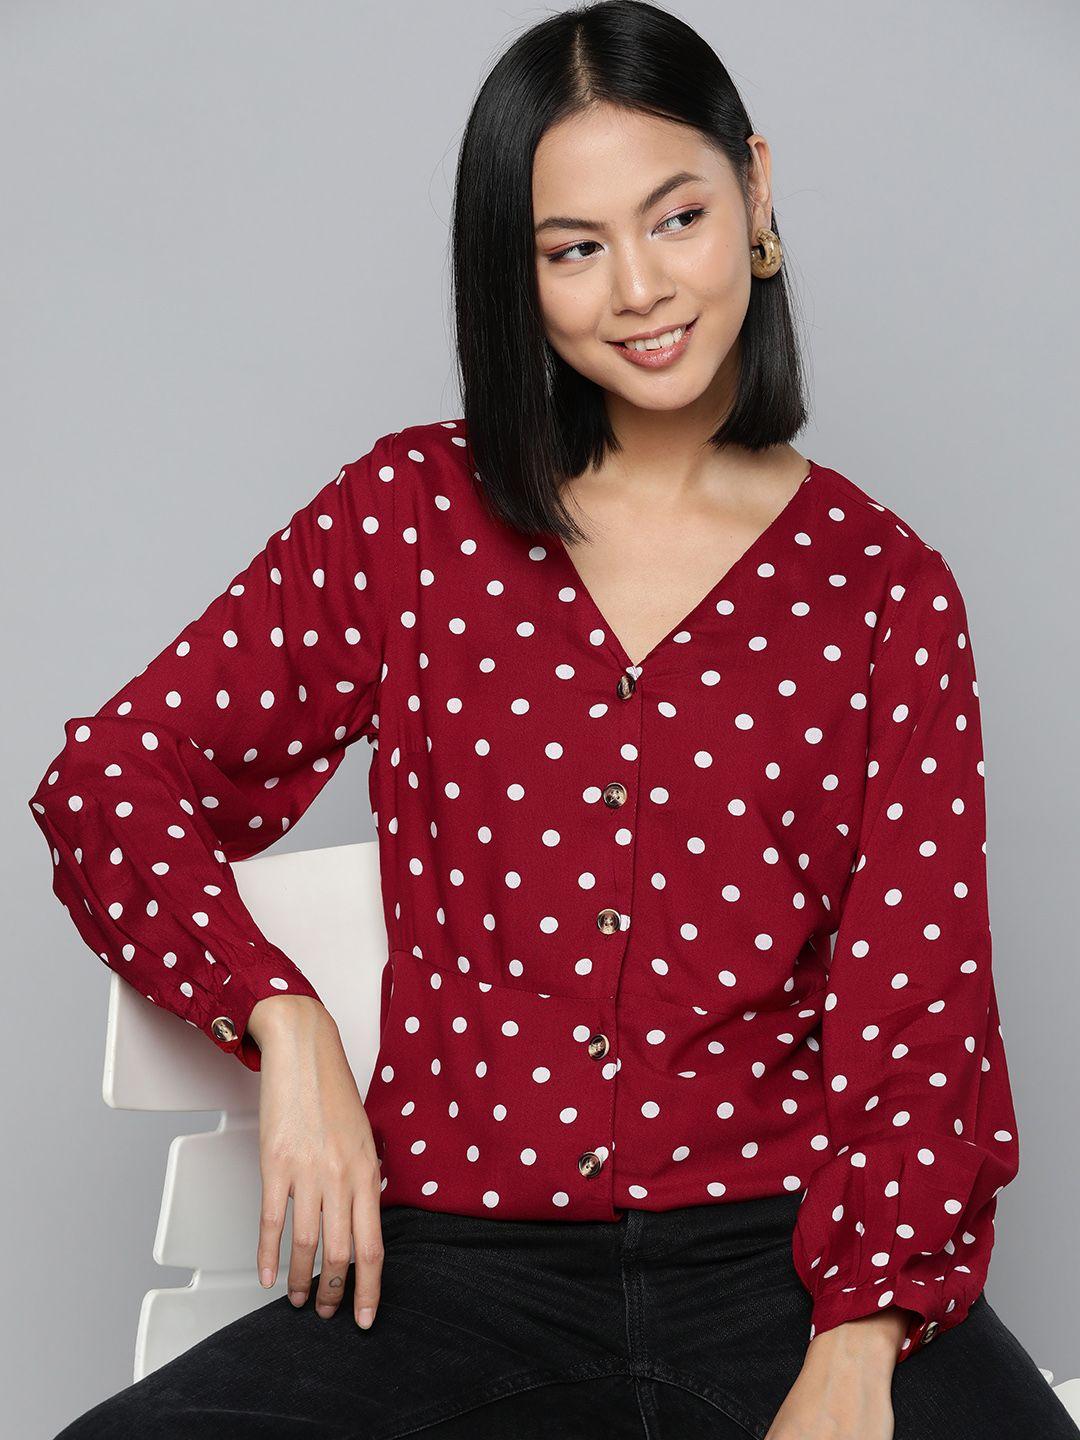 here&now women polka dots printed puff sleeves top